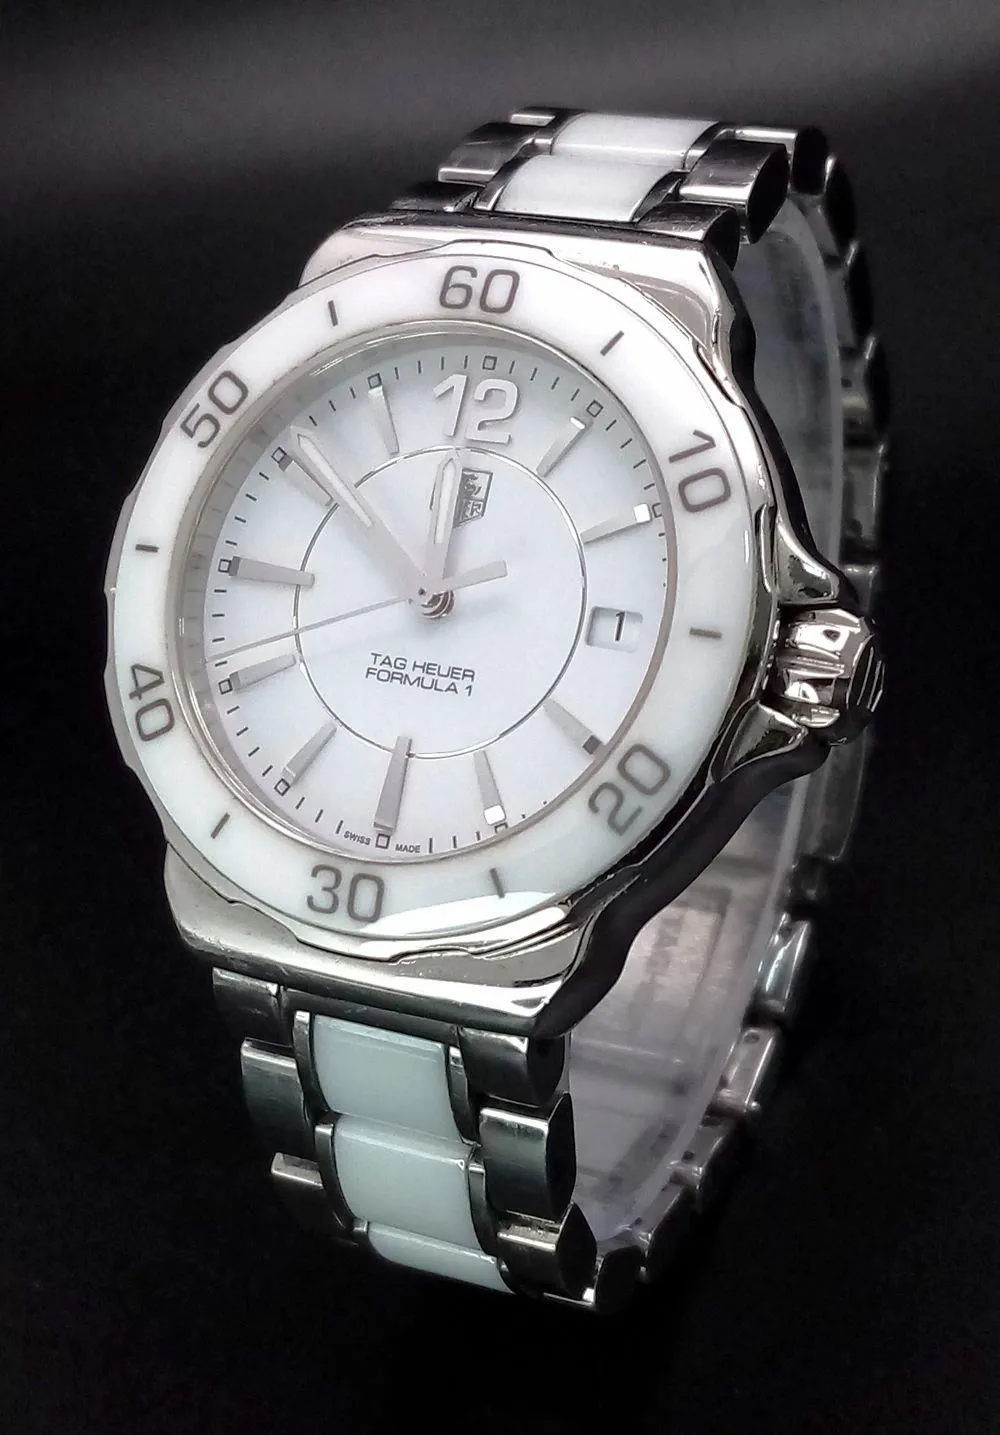 TAG Heuer Formula 1 Quartz 017960 35mm Ceramic and Stainless Steel White